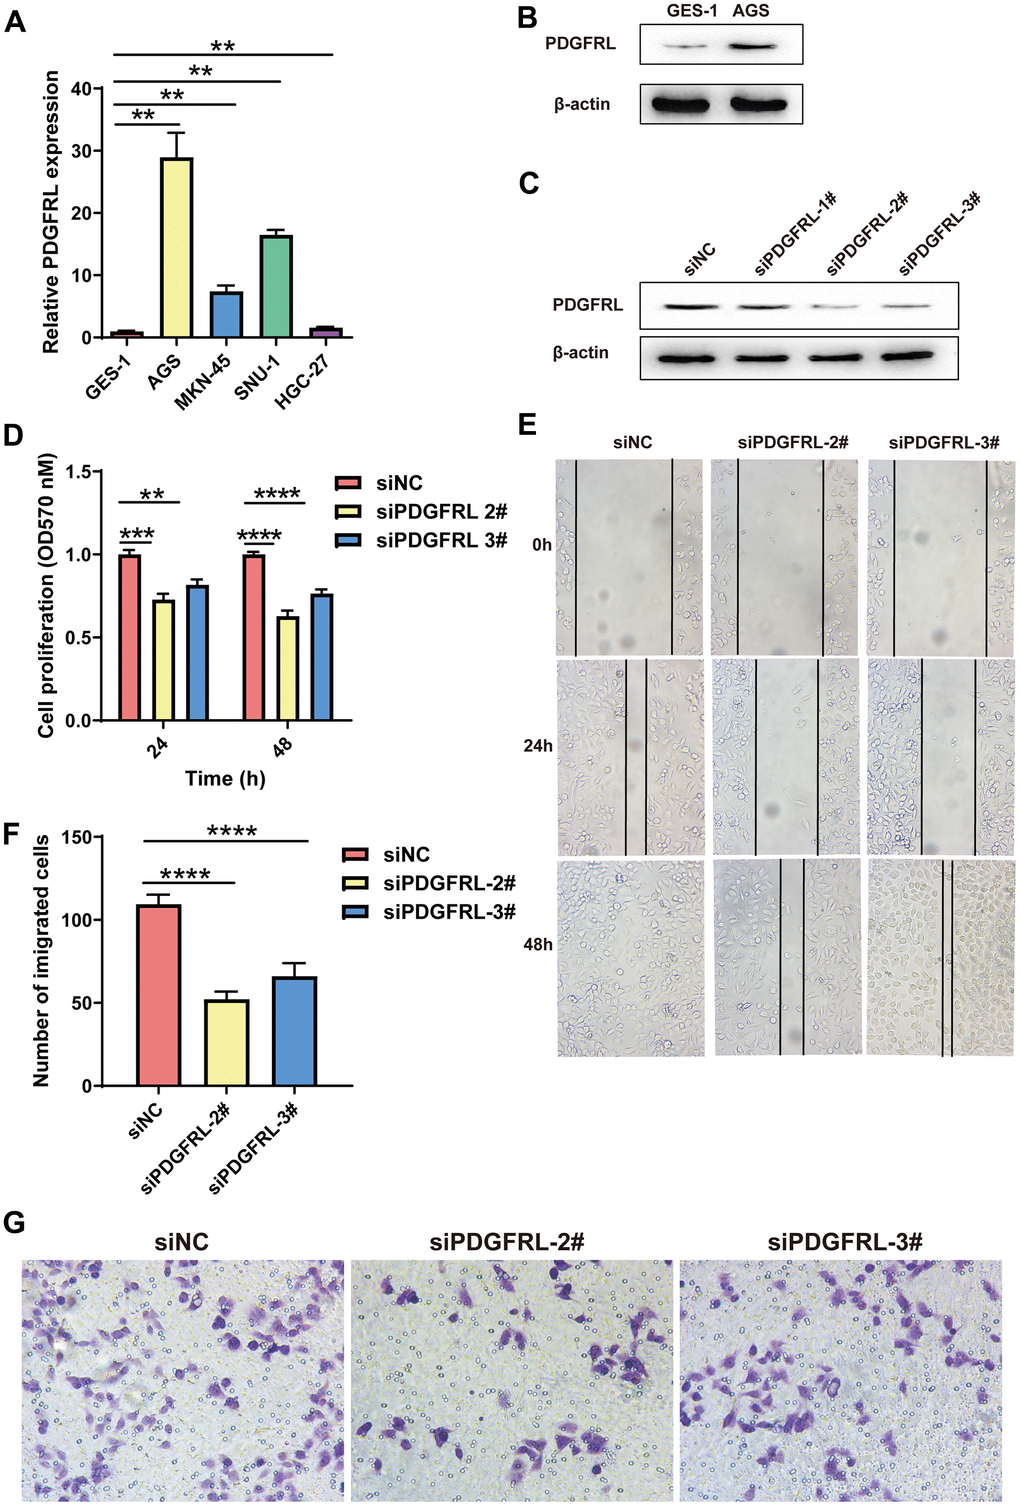 Functional validation for PDGFRL in GC cells. (A) PDGFRL mRNA expressions in normal gastric cells GES-1 and GC cells AGS, MKN-45, SUN-1 and HGC-27. (B) PDGFRL protein expressions in GES-1 and AGS cells. (C) AGS cells were transiently transfected with three different PDGFRL siRNAs (siPDGFRL-1#, siPDGFRL-2# and siPDGFRL-3#) and their negative control (siNC). Western blot was used to measure PDGFRL expressions. β-actin was used as loading control. MTT assay (D), wound healing assay (E) and transwell assay (F) were used to measure proliferation, migration and invasion of AGS cells, respectively. Representative images of the transwell assay were shown (G). The data were presented as the mean ± standard deviation. *** P P P 